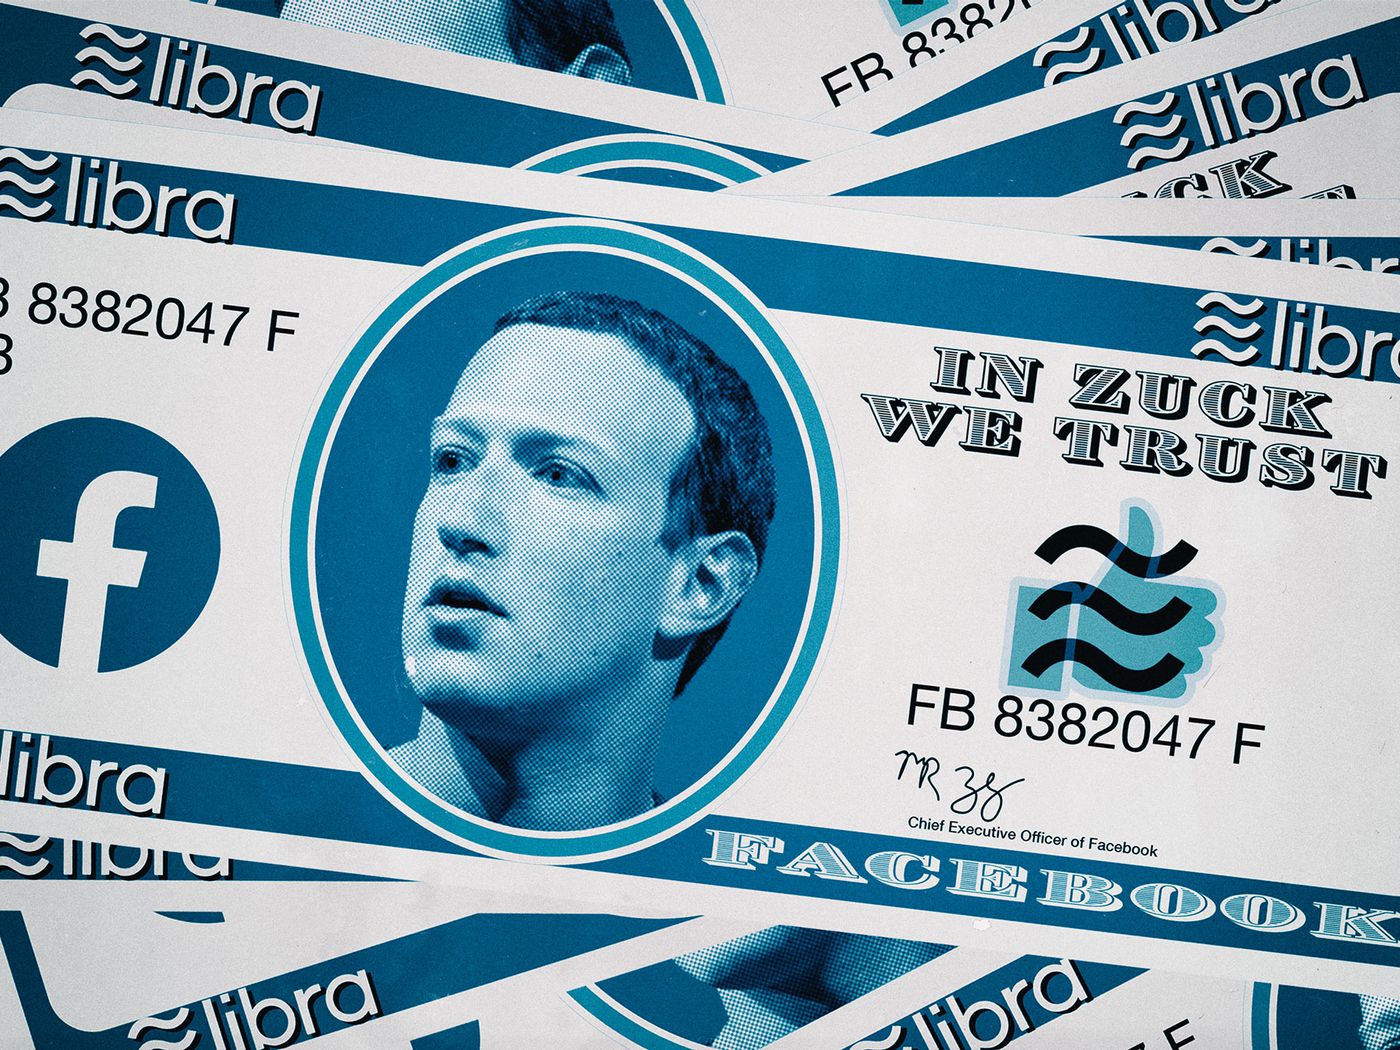 Don't Trust Libra, Facebook’s New Cryptocurrency - The Atlantic